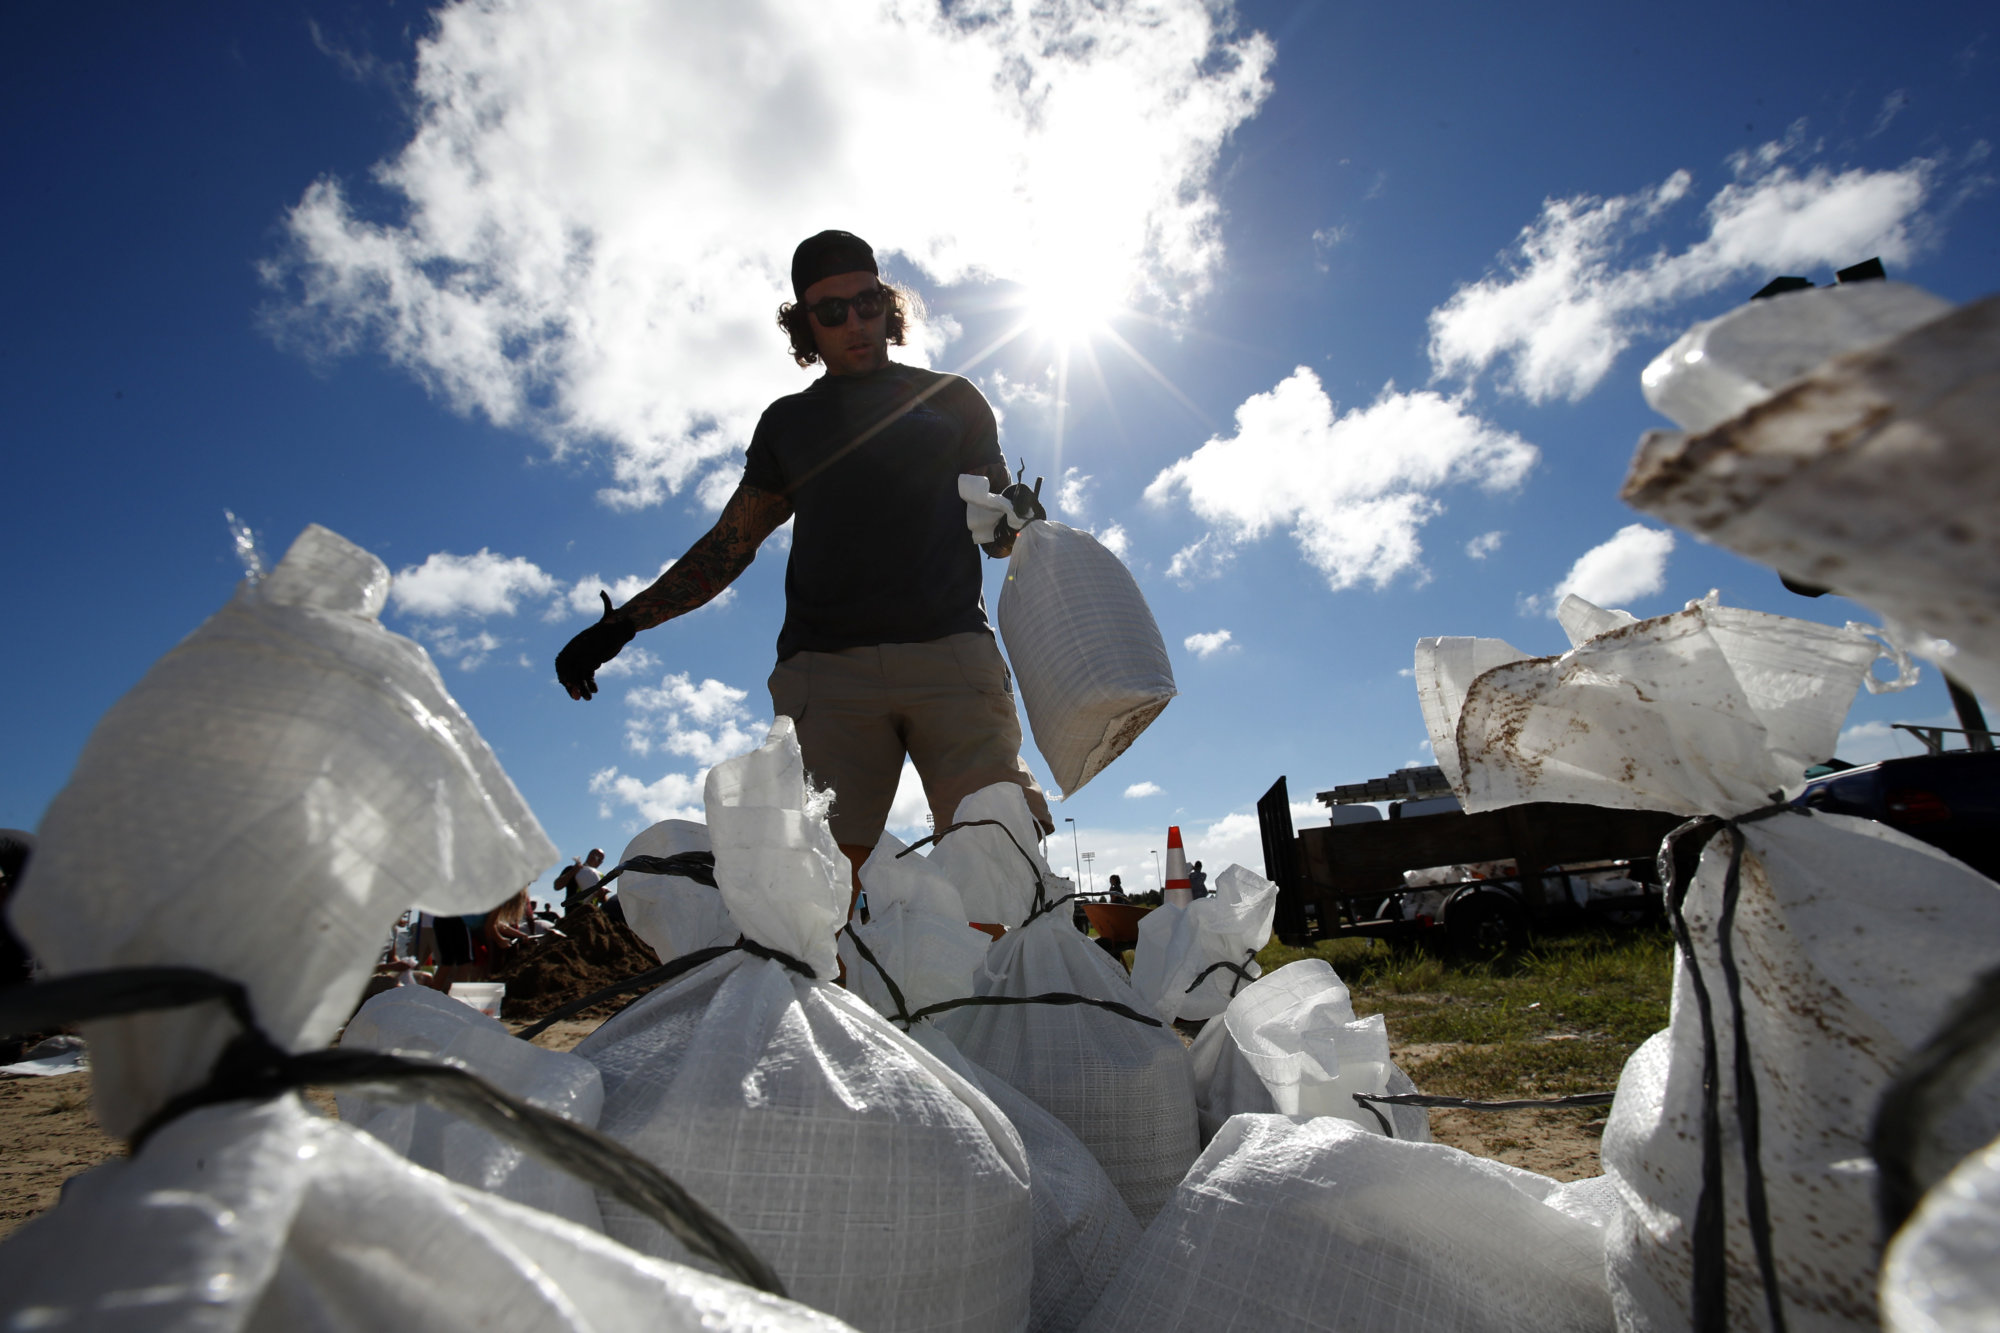 A Virginia Beach, Va., resident moves a sandbag before loading it in his truck, Wednesday, Sept. 12, 2018, in Virginia Beach, Va., as Hurricane Florence moves towards the eastern shore. The National Hurricane Center's projected track had Florence hovering off the southern North Carolina coast from Thursday night until landfall Saturday morning or so, about a day later than previously expected. The track also shifted somewhat south and west, throwing Georgia into peril as Florence moves inland. (AP Photo/Alex Brandon)